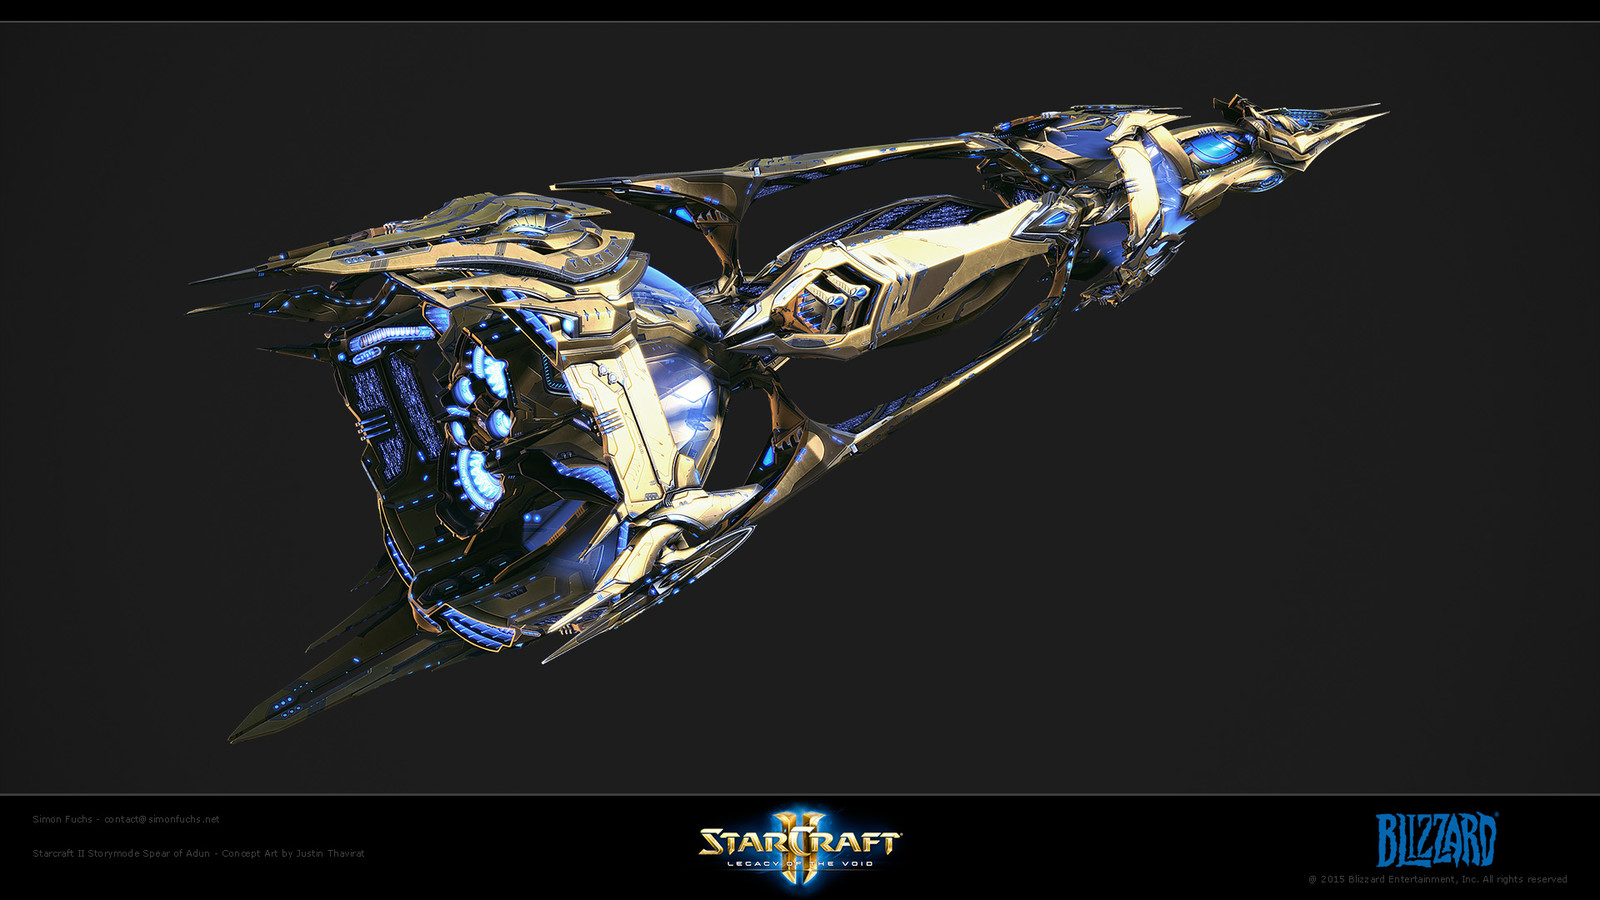 Starcraft II Legacy of the Void - Spear of Adun - InGame.